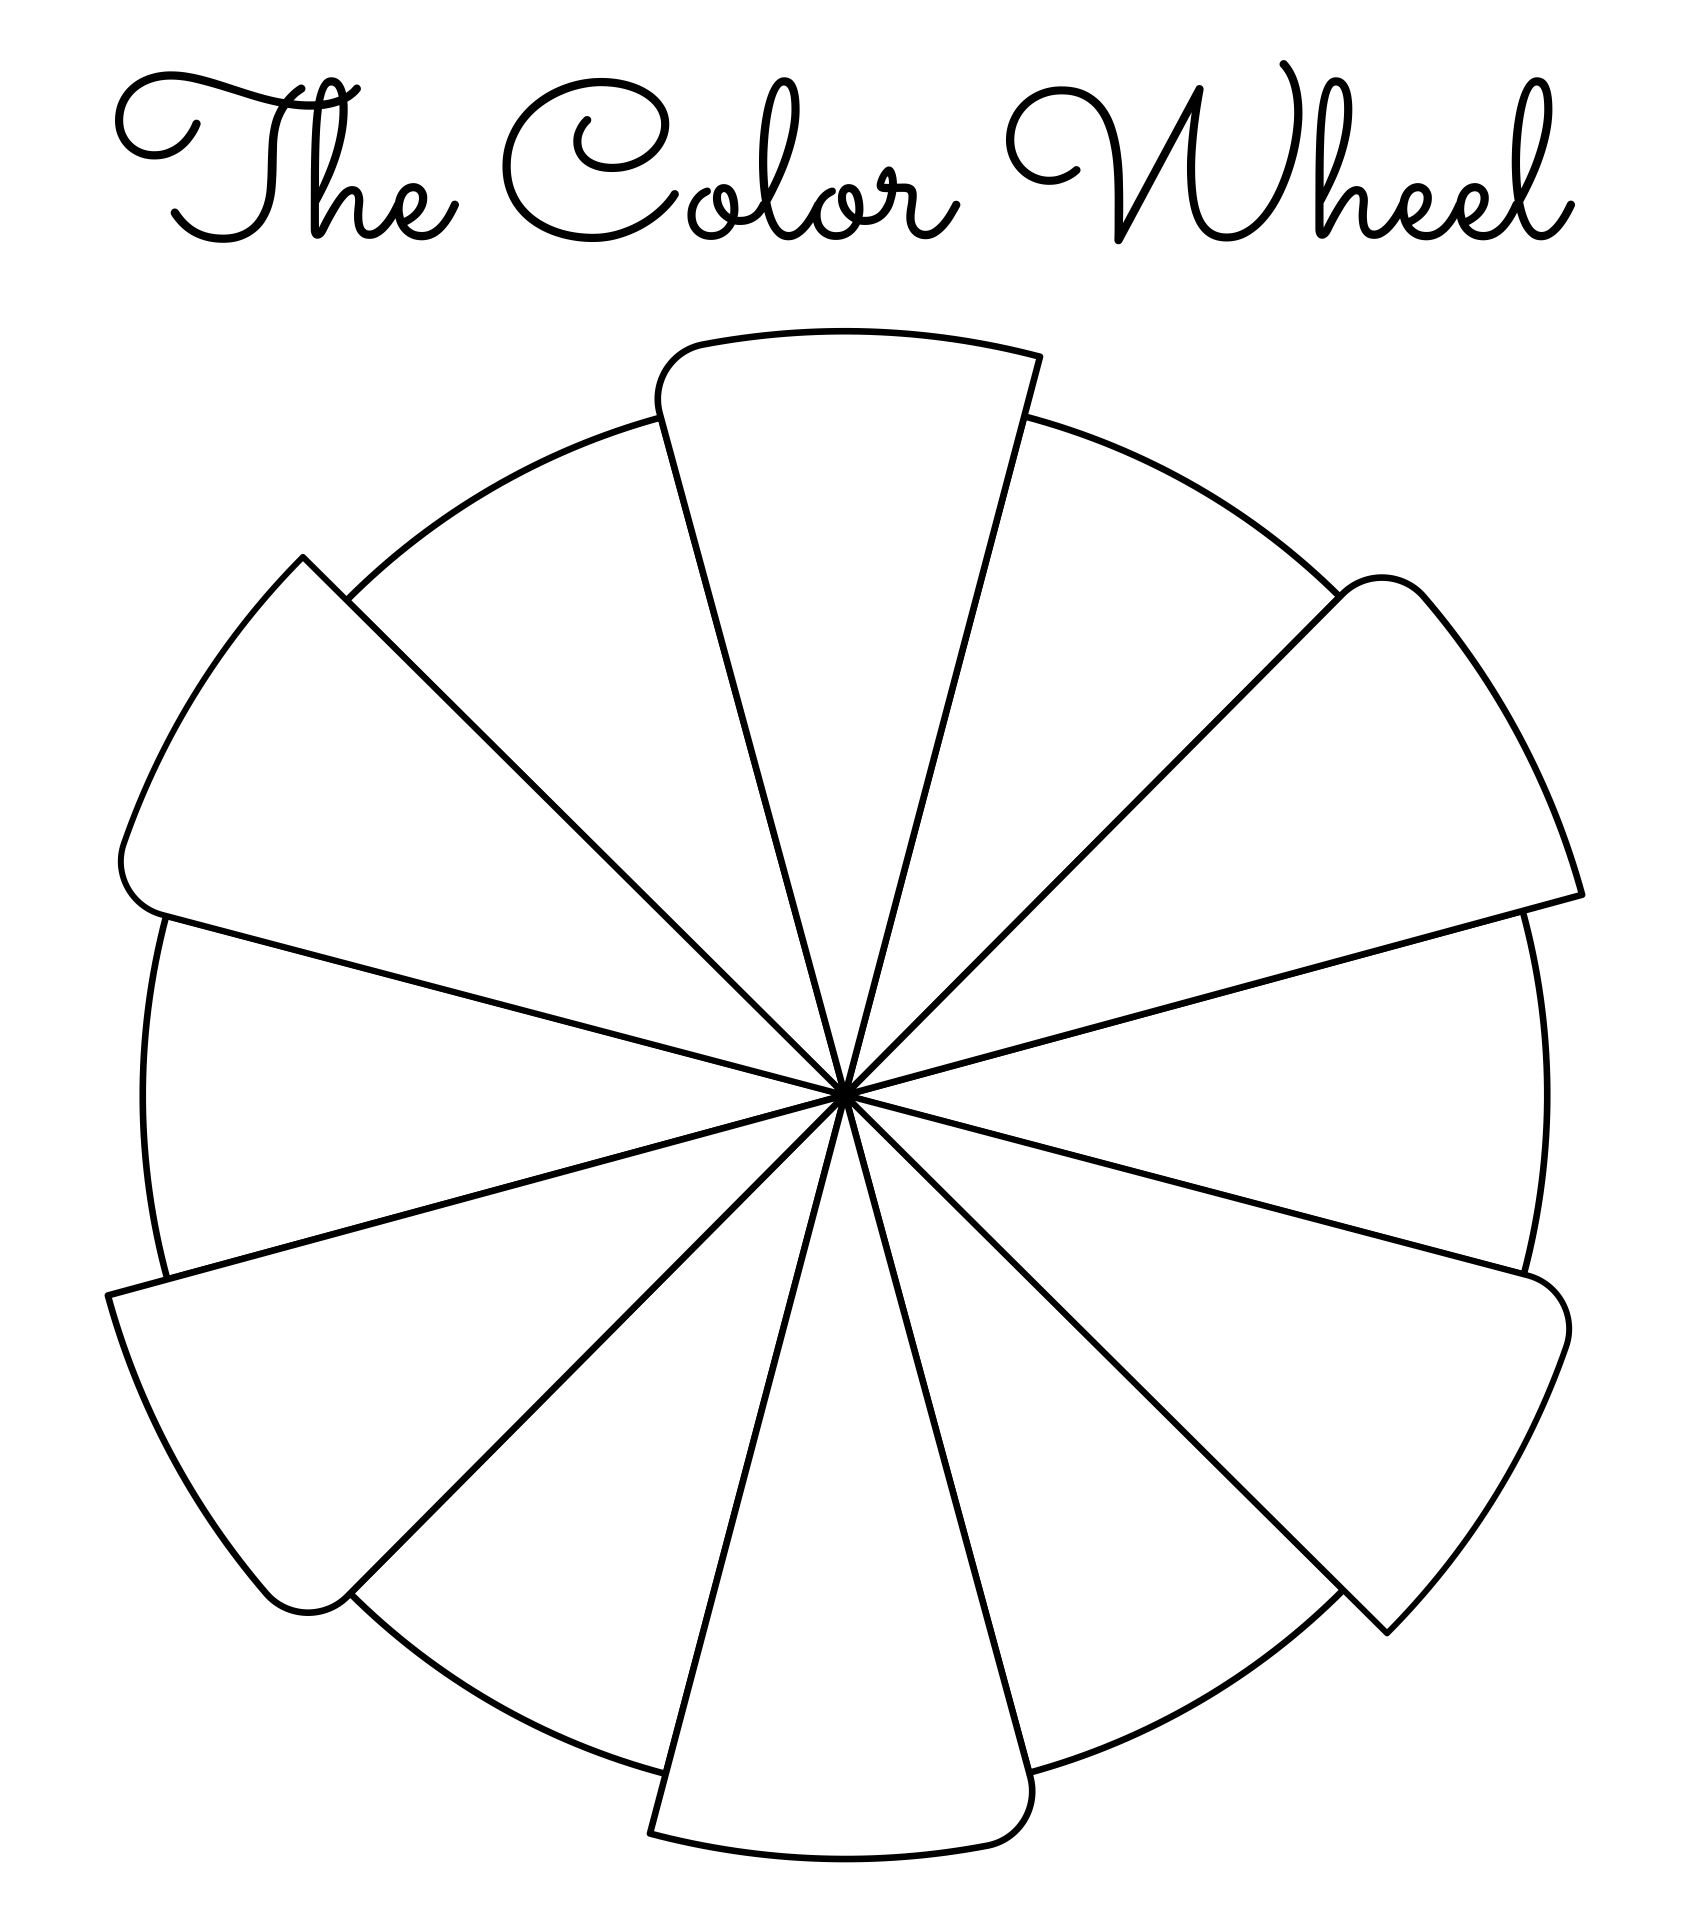 Blank Color Wheel Template